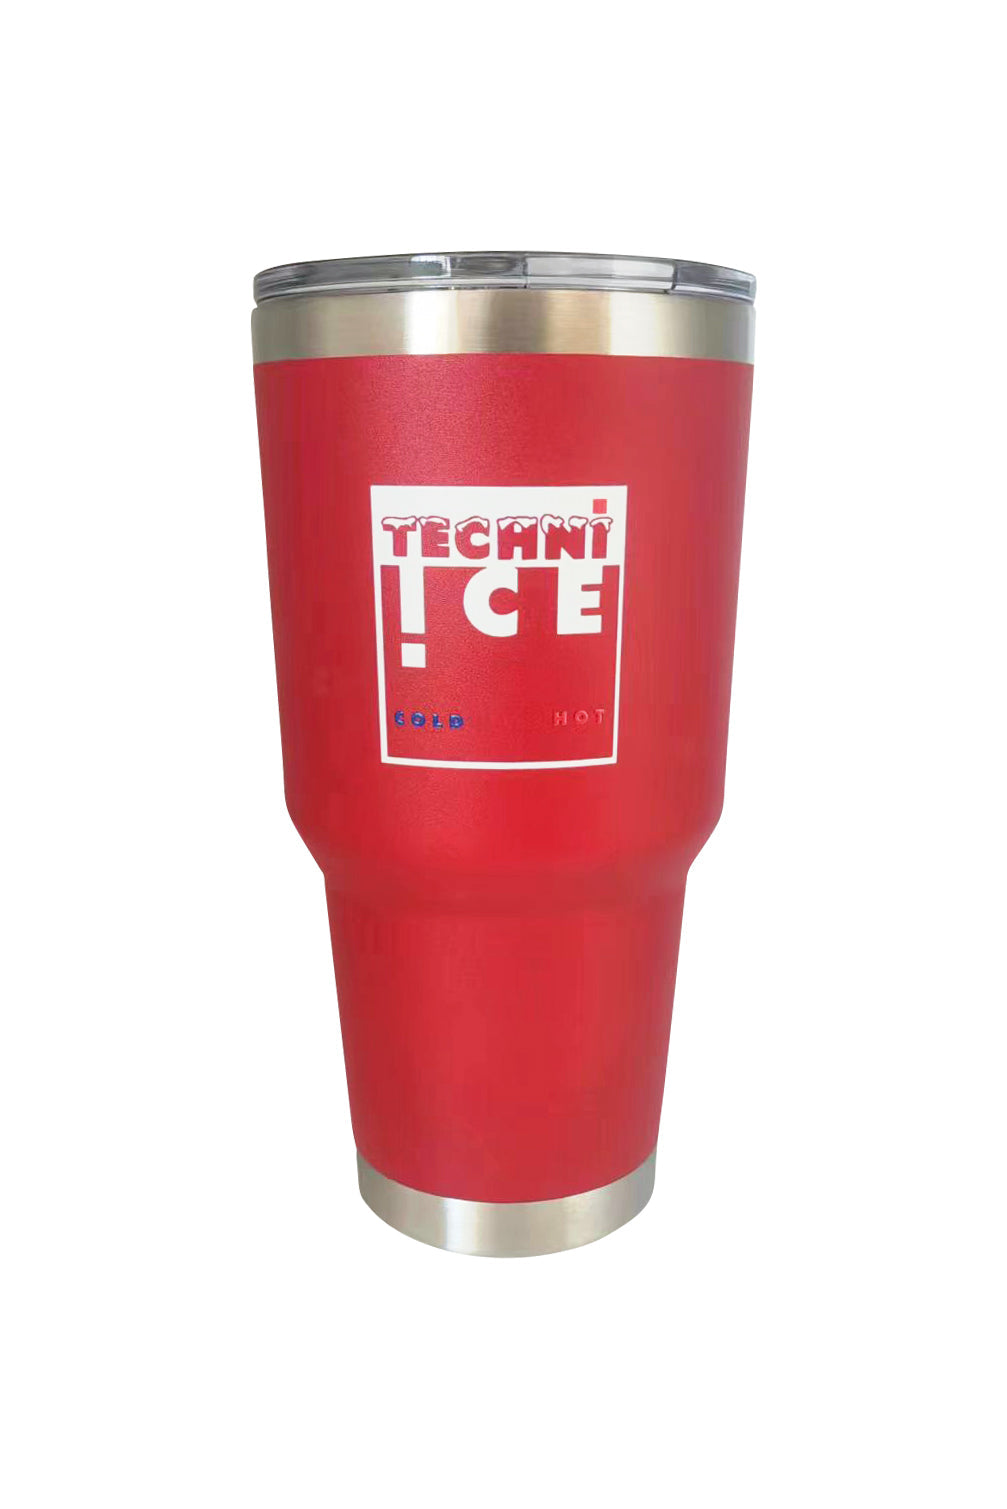 New 2024 Model Techni Ice 900ml (30 oz.) Tumbler Red Stainless Steel 6 Years Warranty *FRESH STOCK JUST ARRIVED